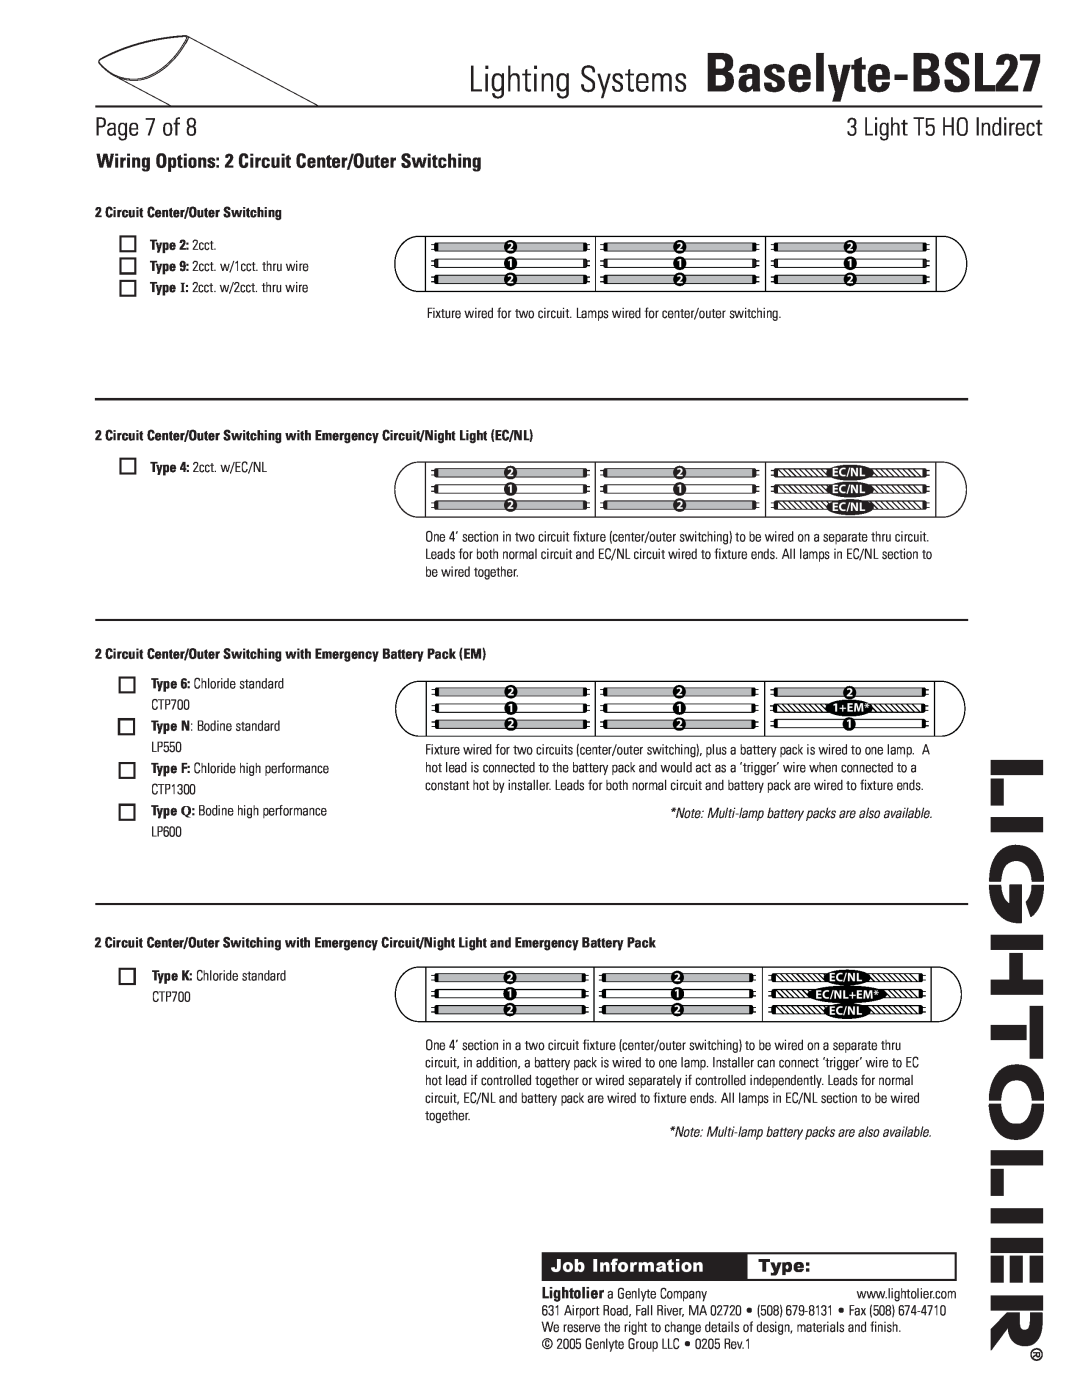 Lightolier Baselyte-BSL27 Wiring Options 2 Circuit Center/Outer Switching, Circuit Center/Outer Switching Type 2: 2cct 